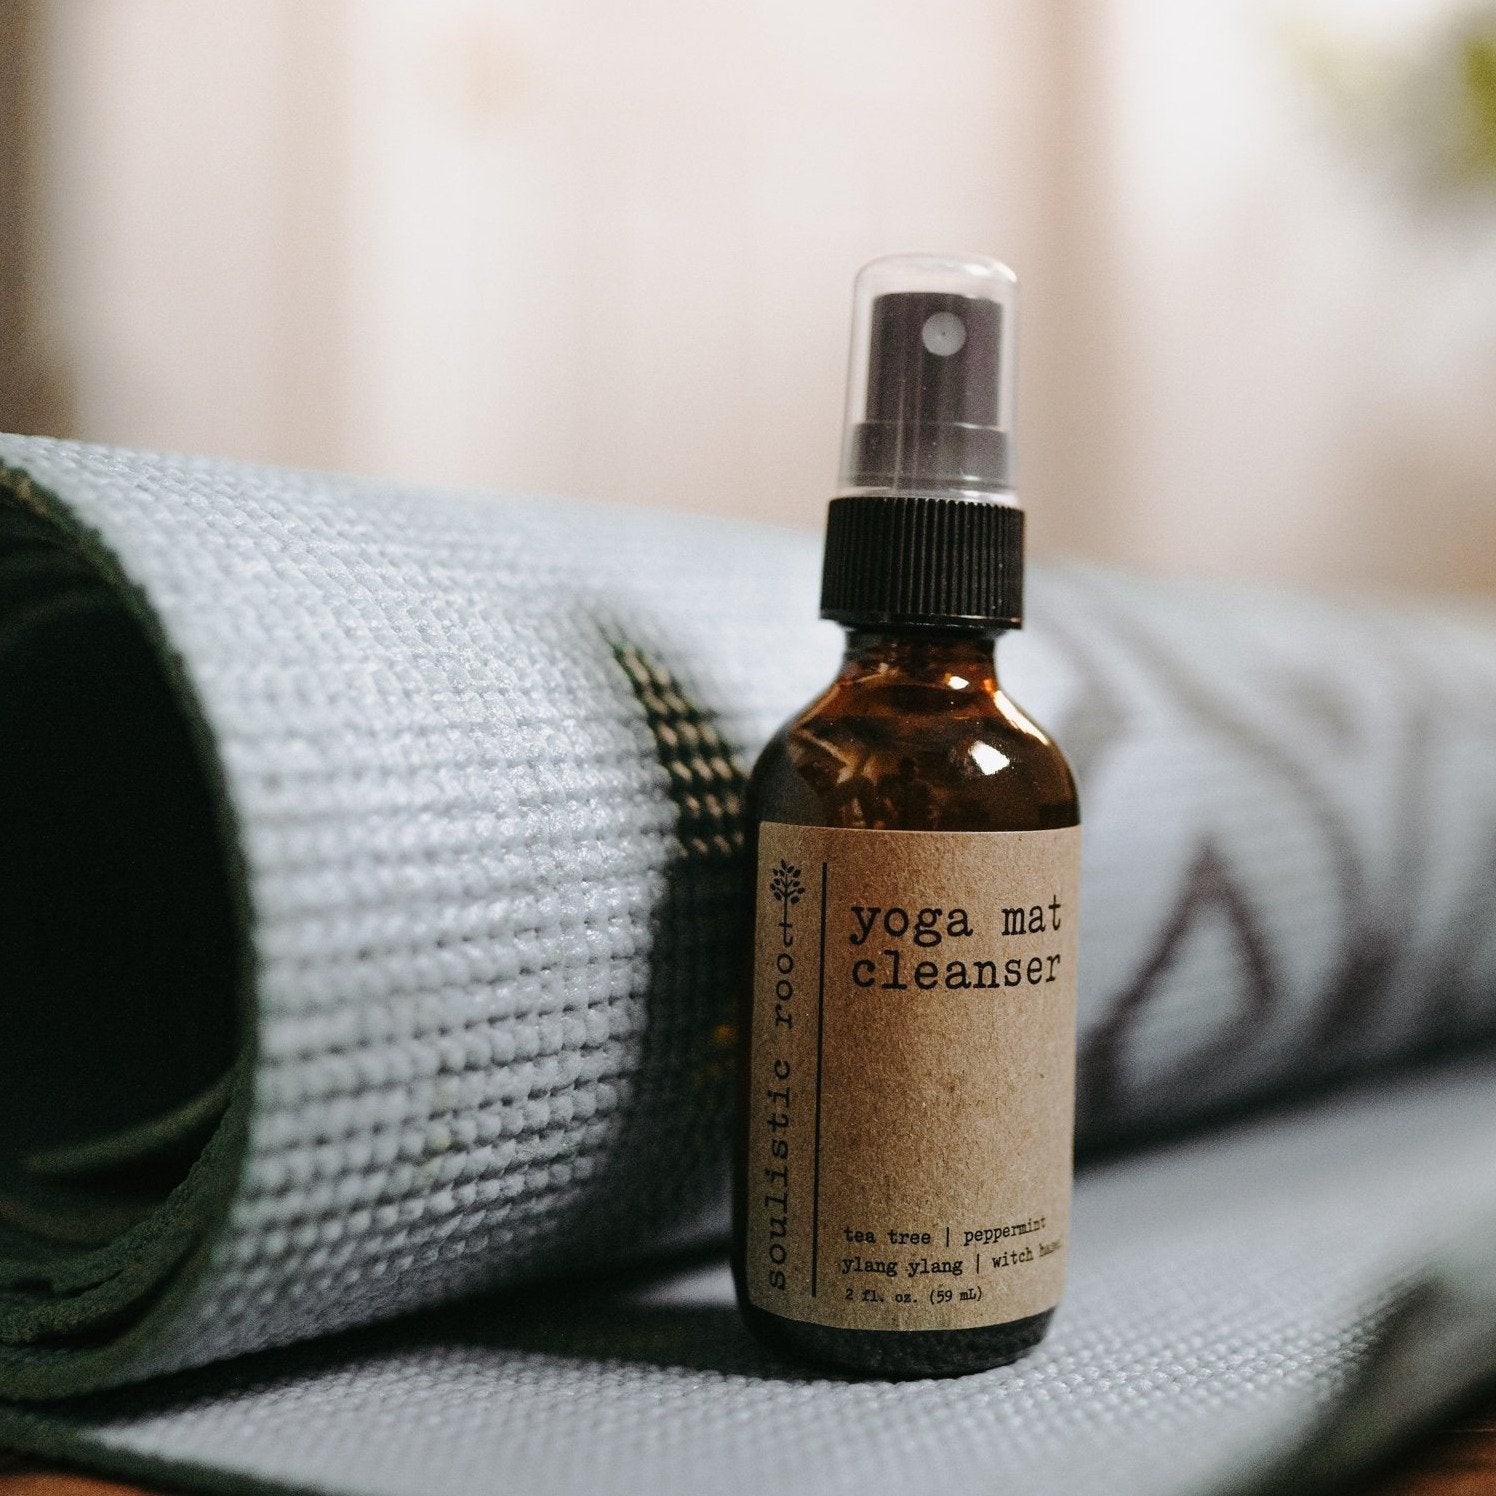 Soulistic Root |  All Natural Yoga Mat Cleanser Spray With Essential Oils - Tea Tree and Peppermint, Yoga Mat Accessories, Soulistic Root, Defiance Outdoor Gear Co.